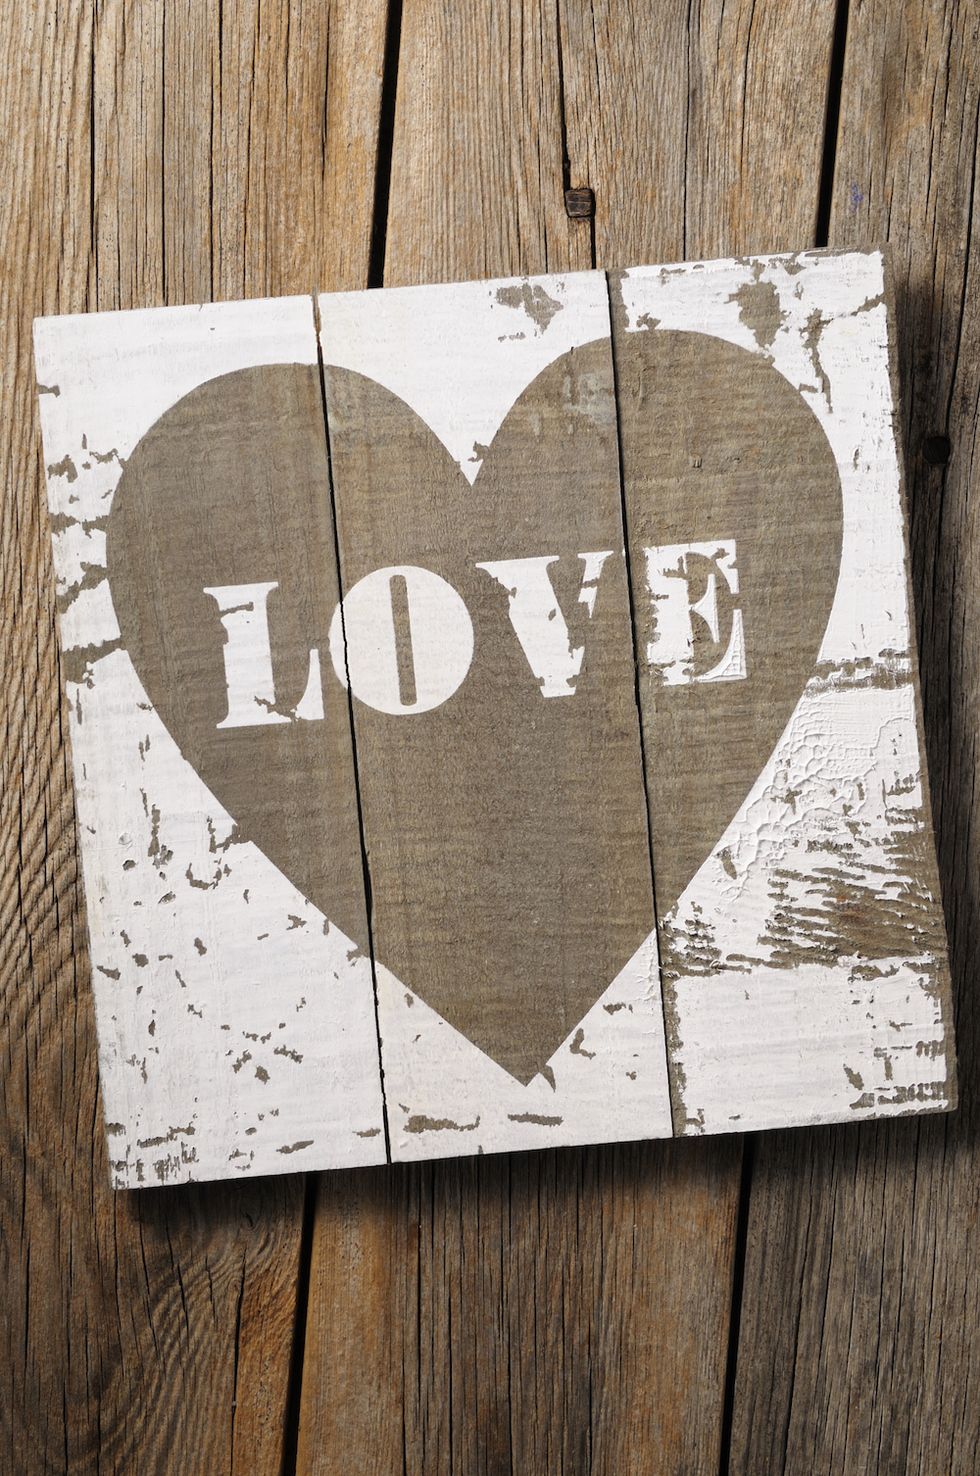 Wood, Hardwood, Heart, Wood stain, Plywood, Circle, Symbol, Plank, Graphics, Paper, 